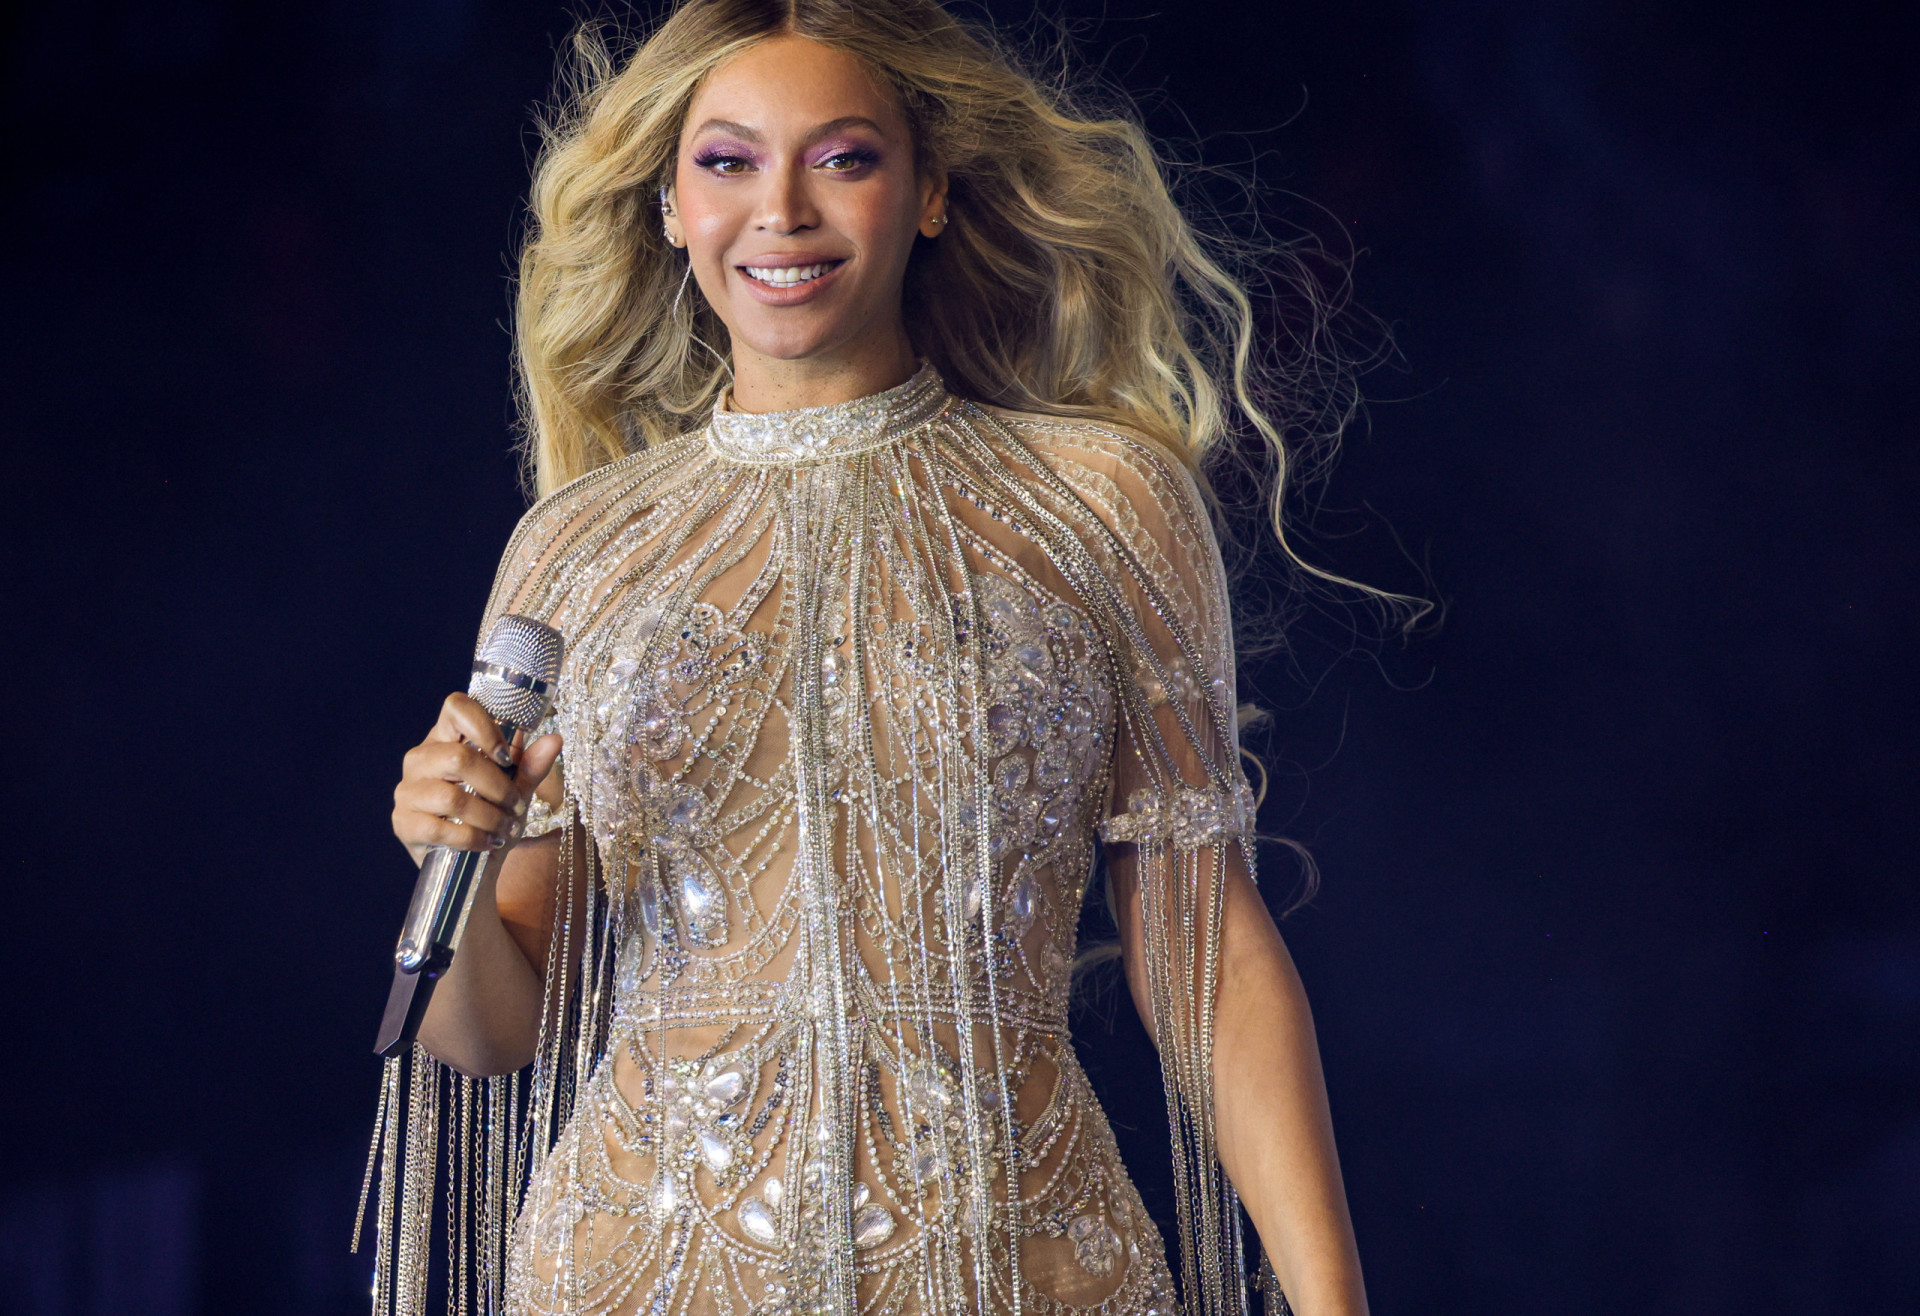 <p>Influenced by her Virgo birth date, Beyoncé's tarot cards showcase her attention to detail and regal presence.</p><p><a href="https://www.msn.com/en-us/community/channel/vid-7xx8mnucu55yw63we9va2gwr7uihbxwc68fxqp25x6tg4ftibpra?cvid=94631541bc0f4f89bfd59158d696ad7e">Follow us and access great exclusive content every day</a></p>